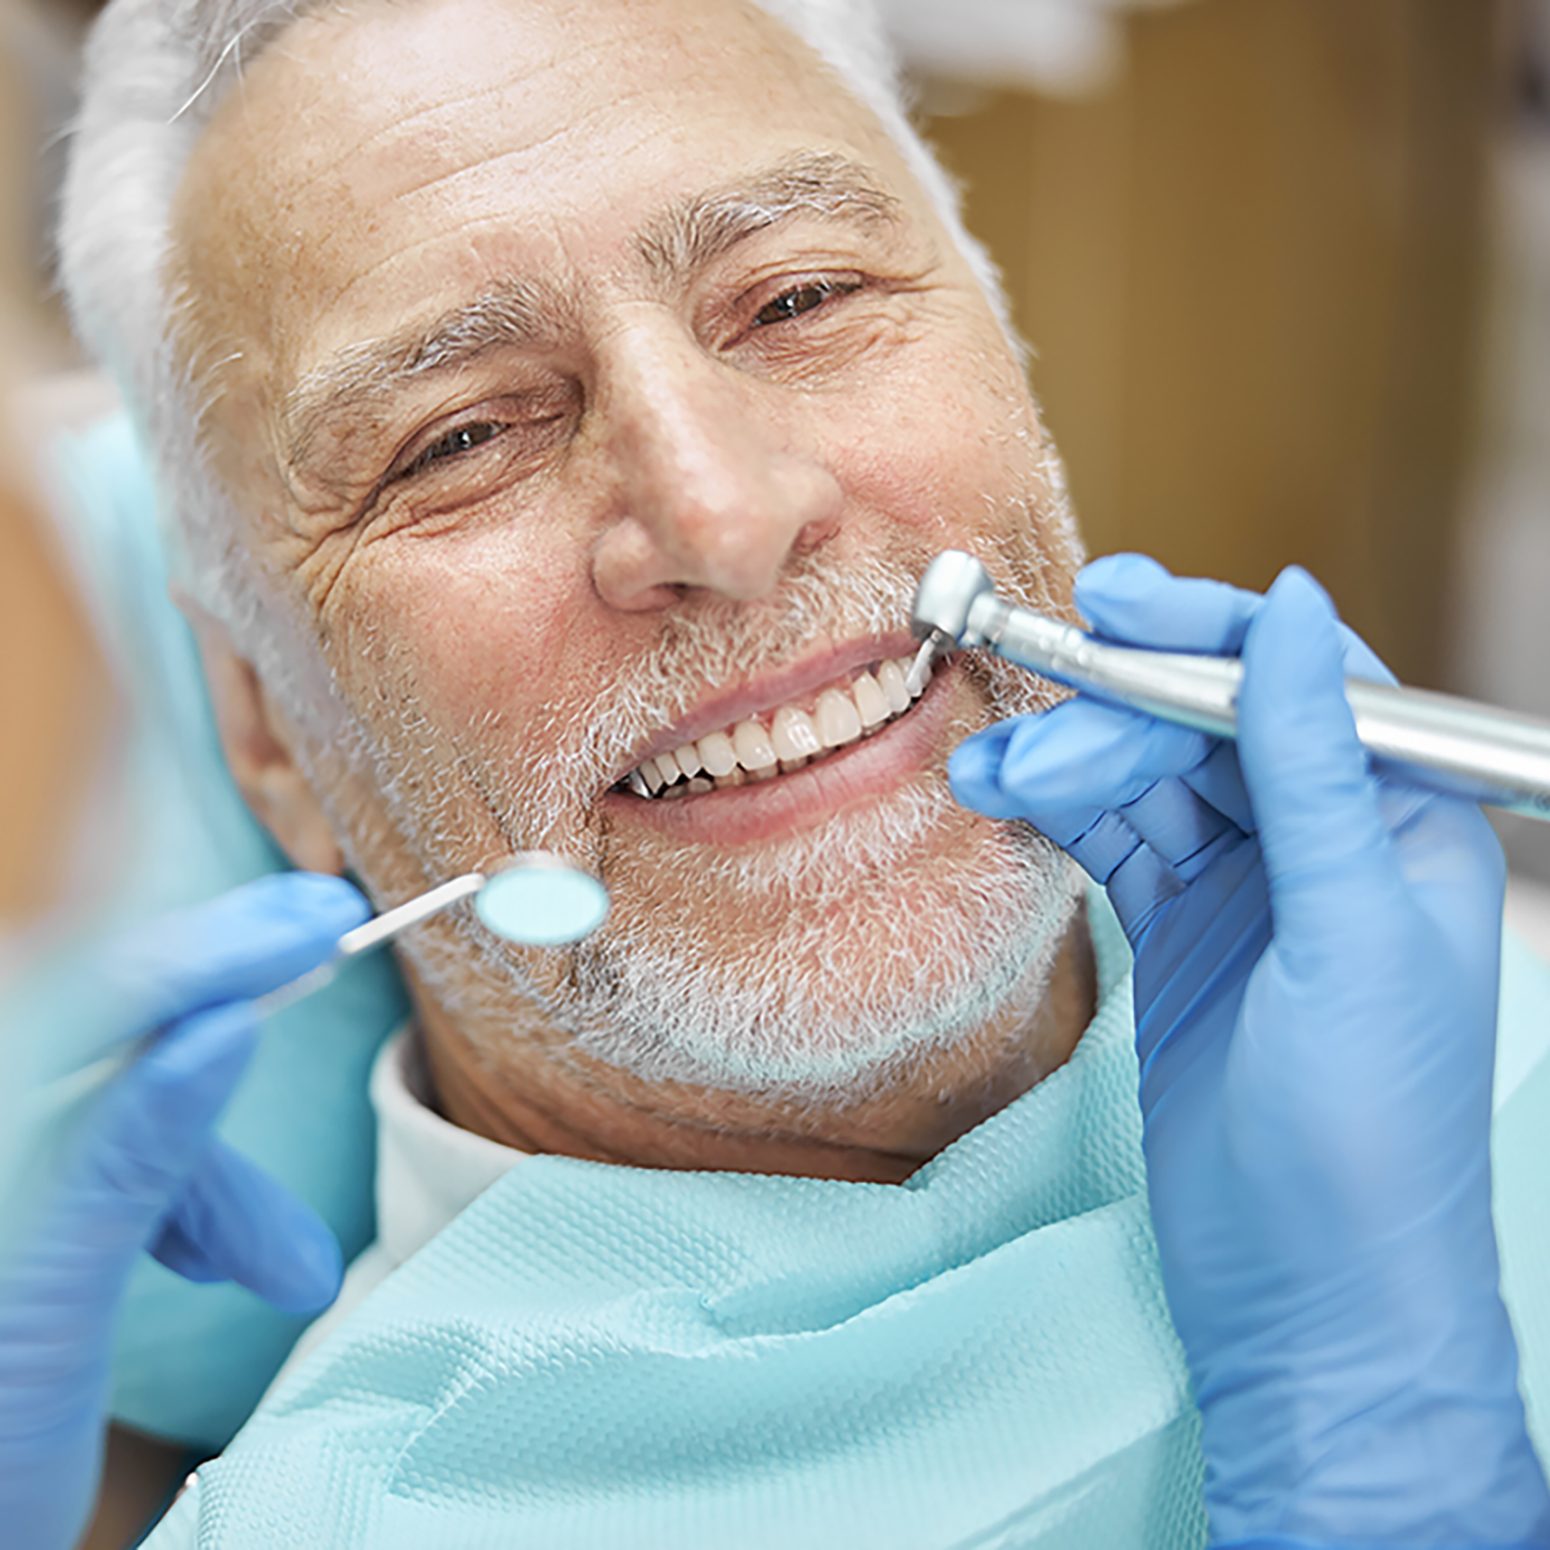 Close-up photo of a cheerful aged man smiling while having his teeth checked for caries and cavities